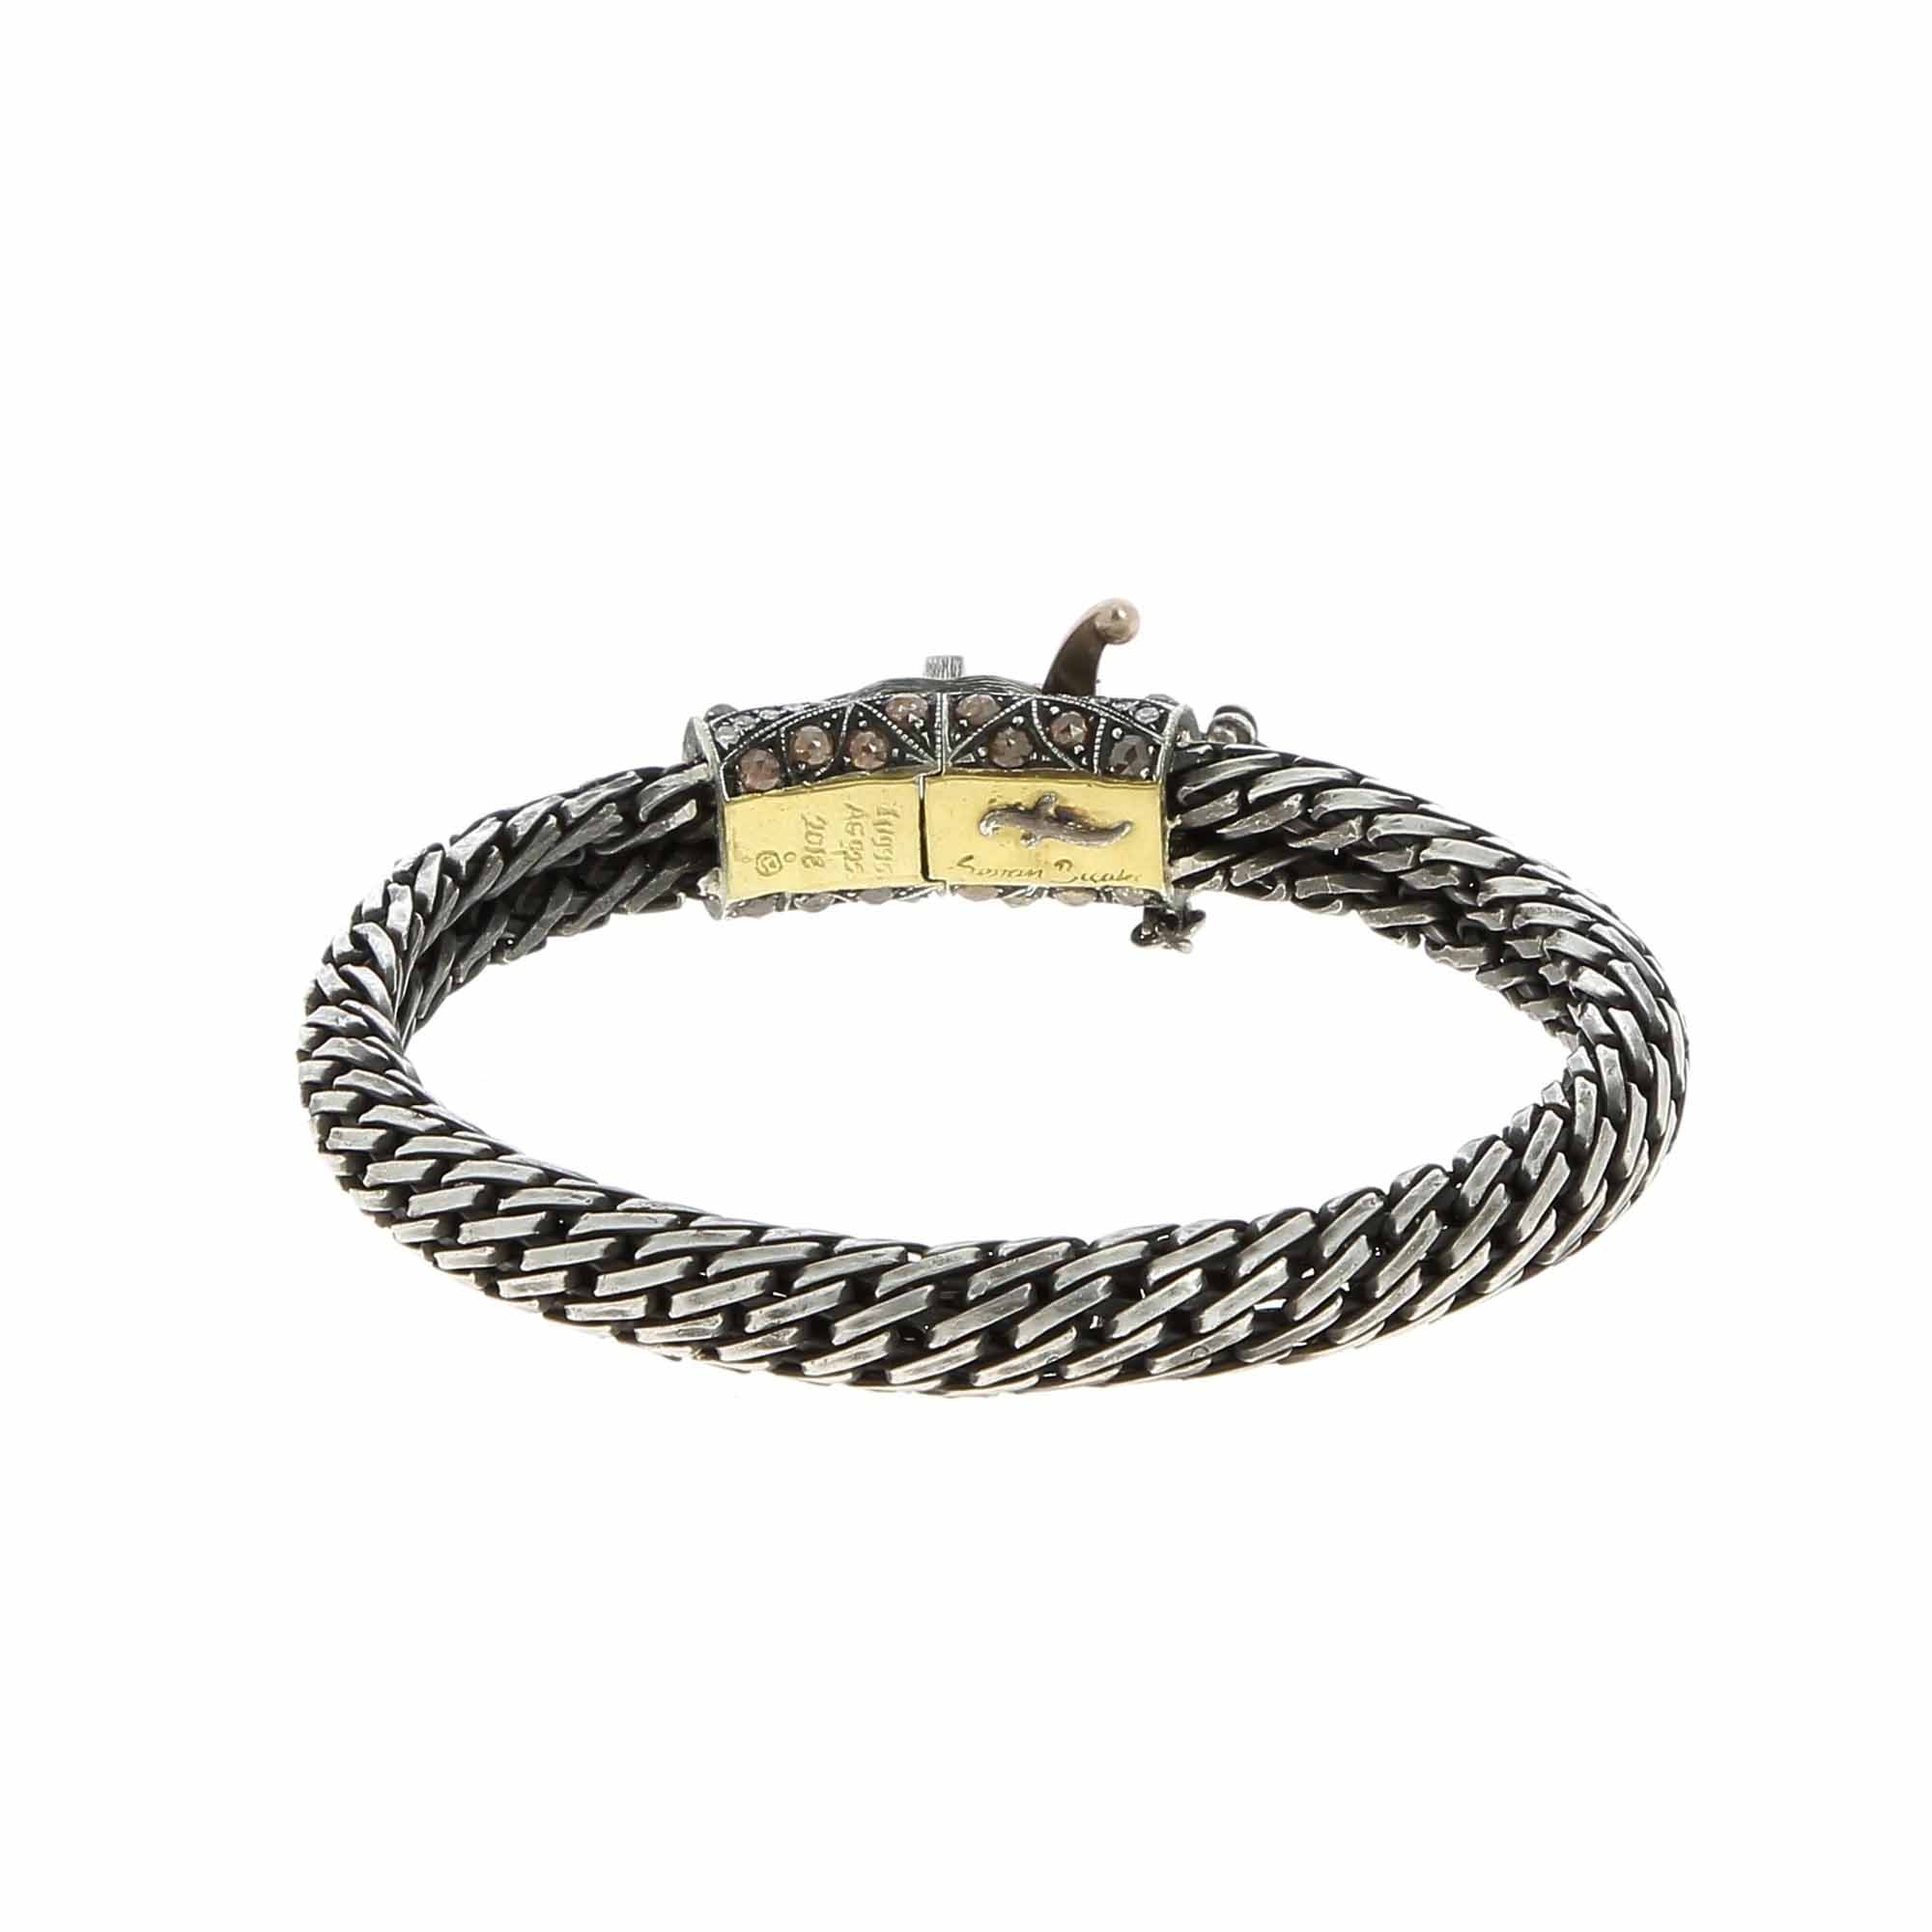 Wholesale OEM/ODM Jewelry Custom made Bracelet yellow gold in sterling silver 925 Plated Jewelry manufacturer and wholesaler